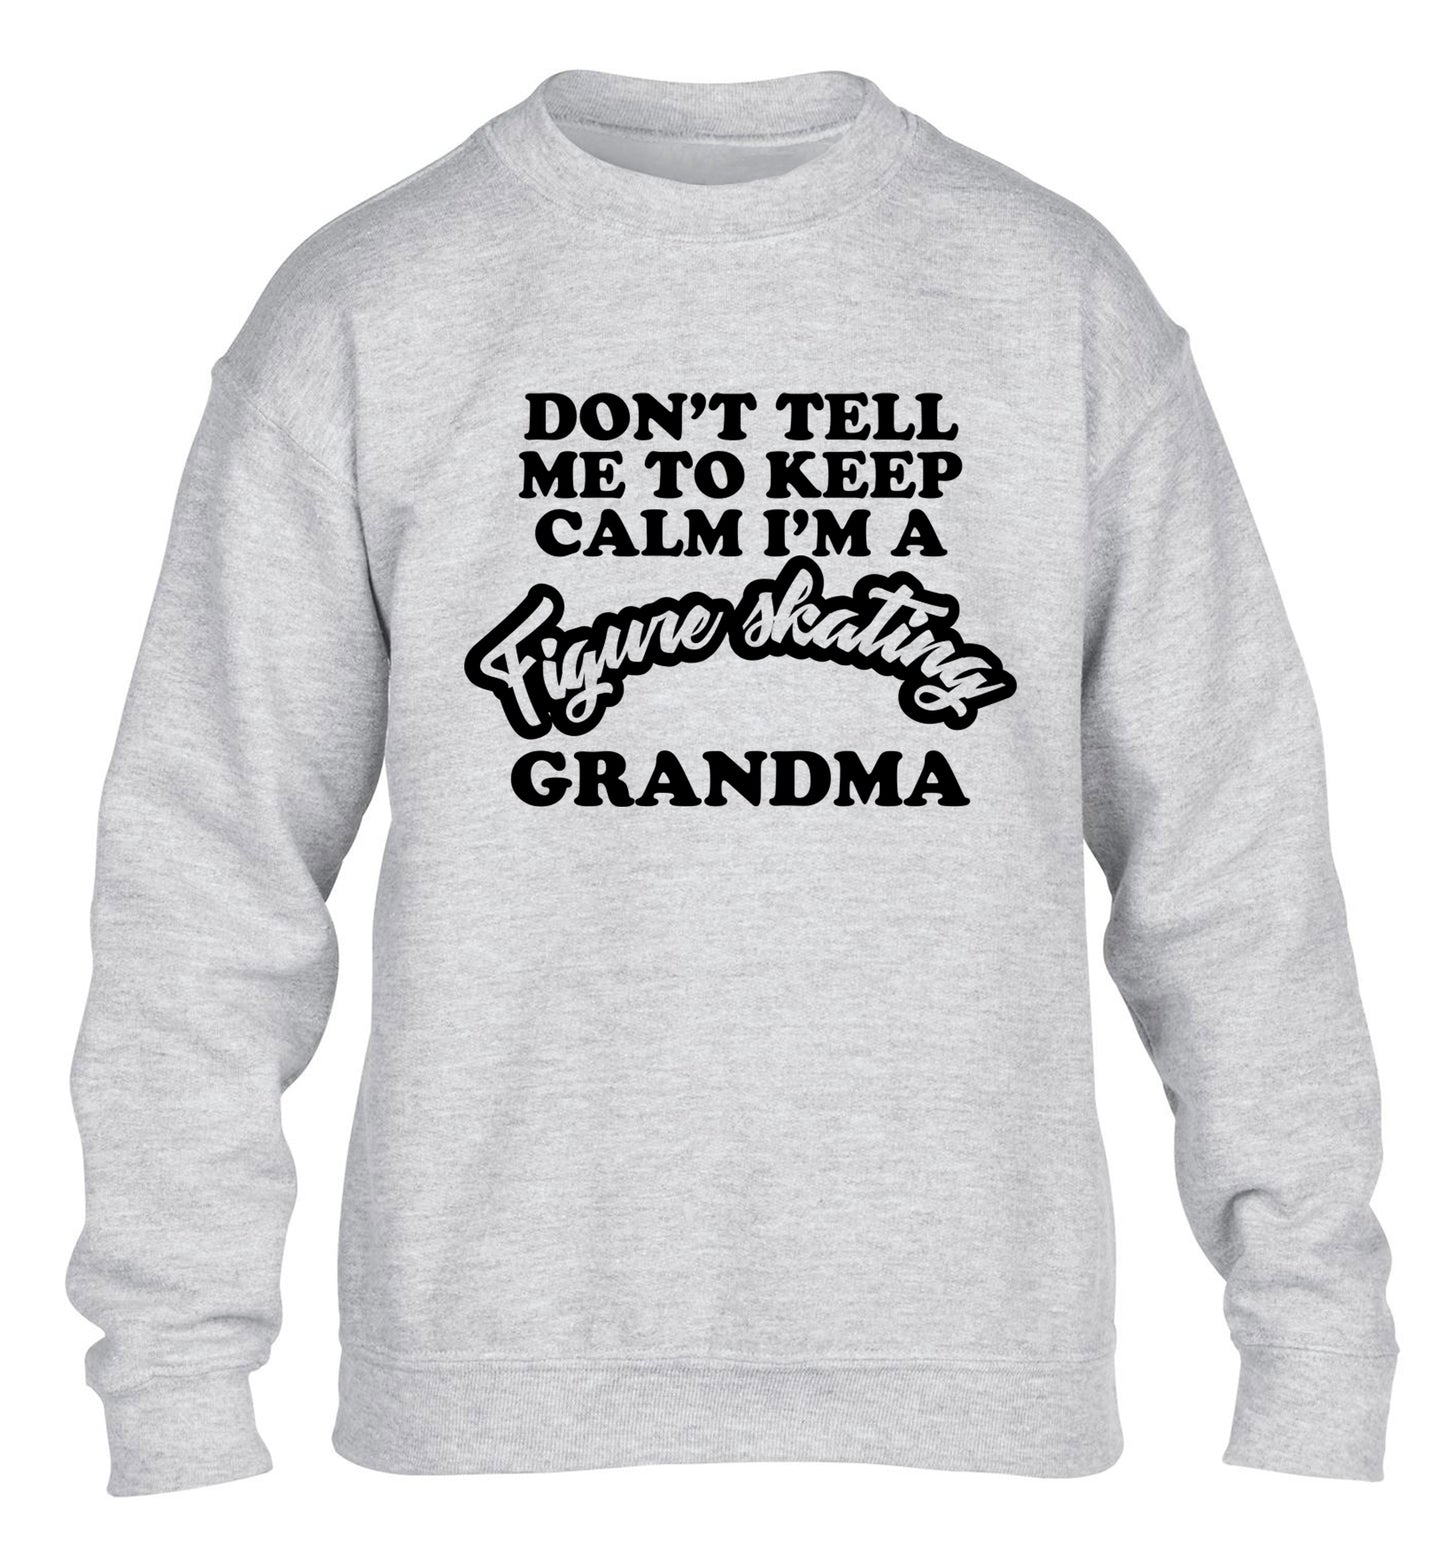 Don't tell me to keep calm I'm a figure skating grandma children's grey sweater 12-14 Years